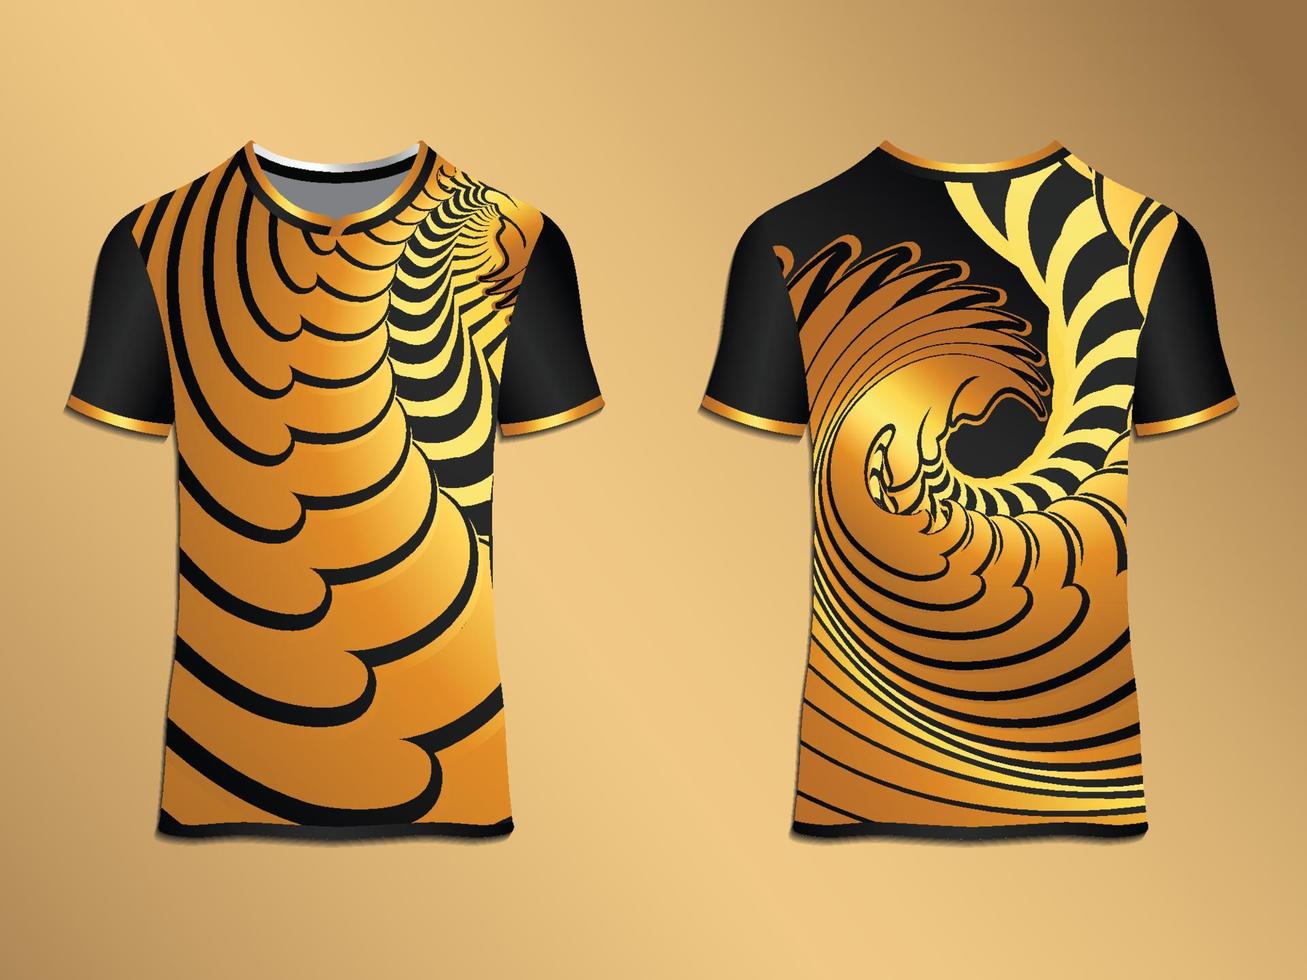 Abstract Tshirt Swirl Gradient Decorative Gold Background vector